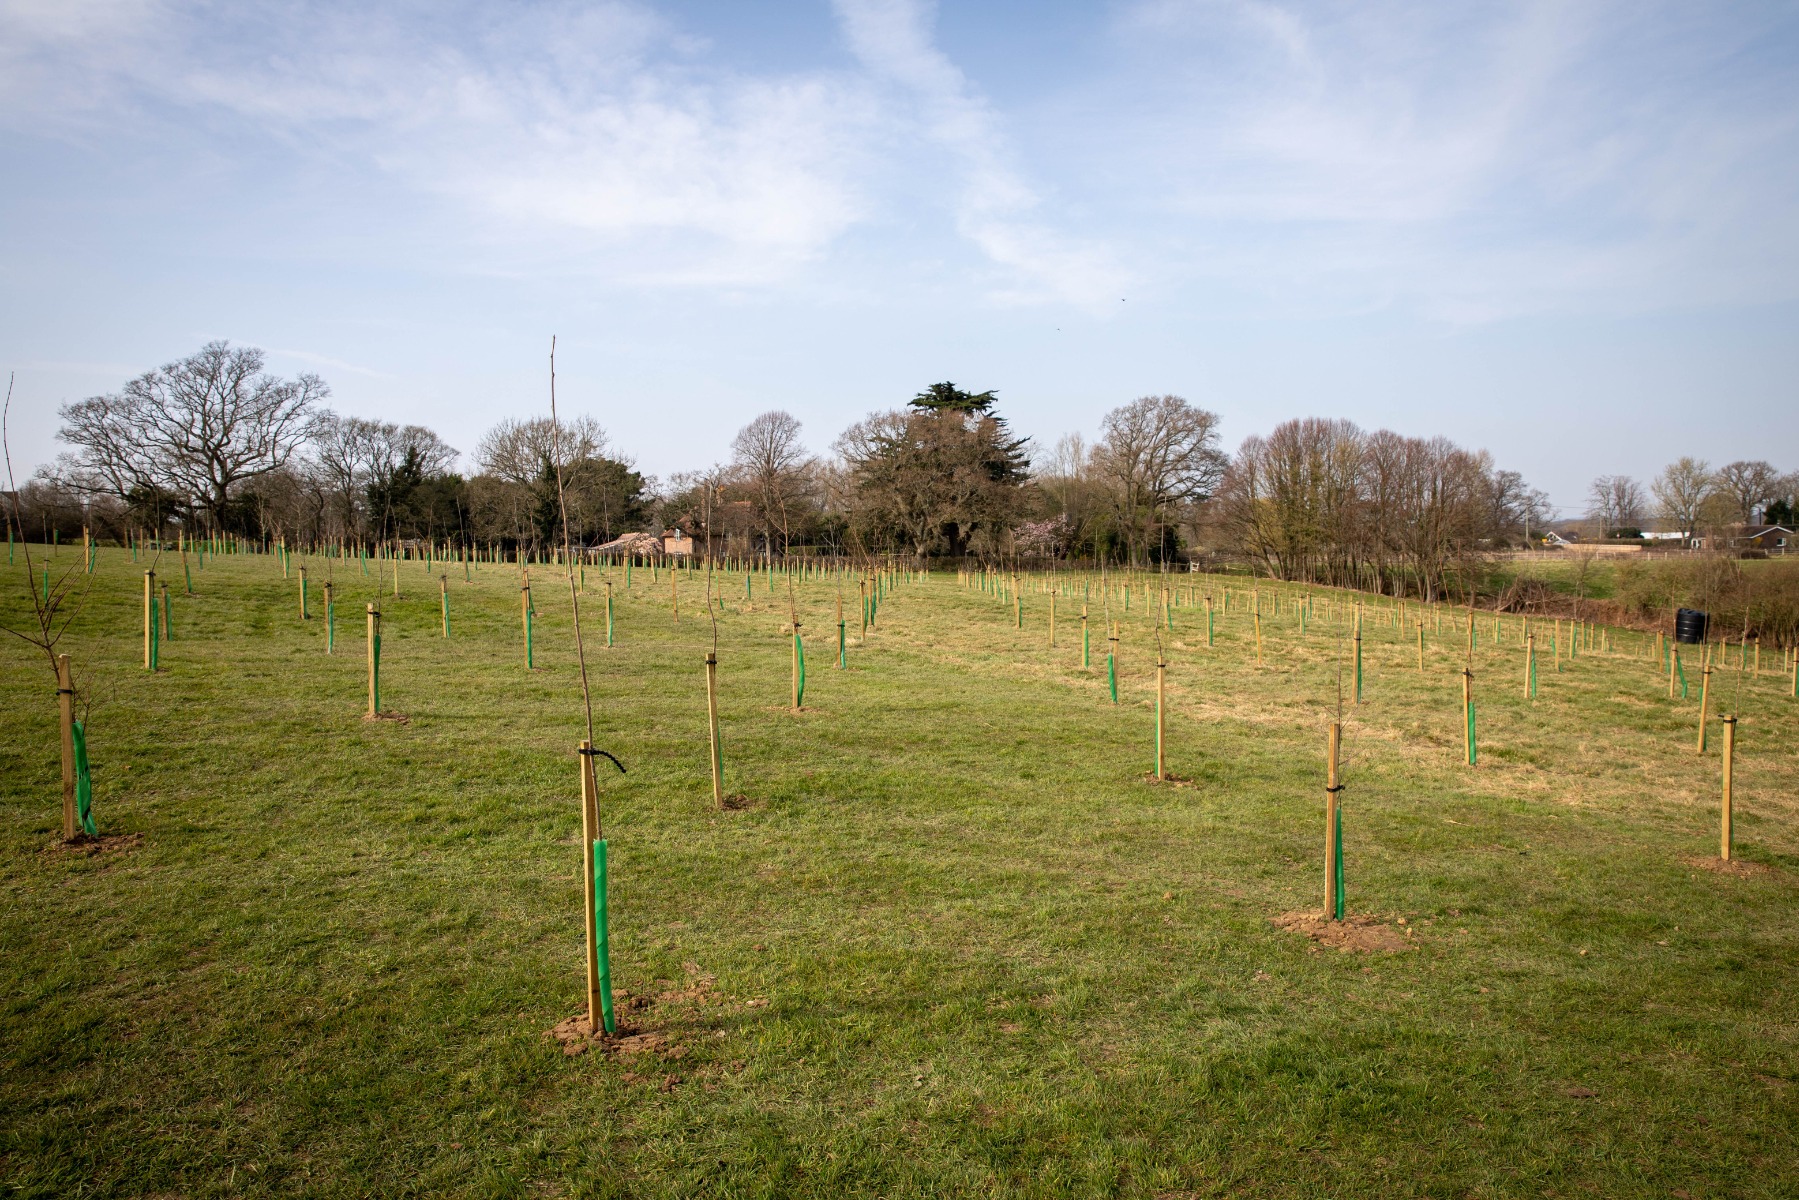 Tree planting to celebrate the Platinum Jubilee at Bede's School in East Sussex